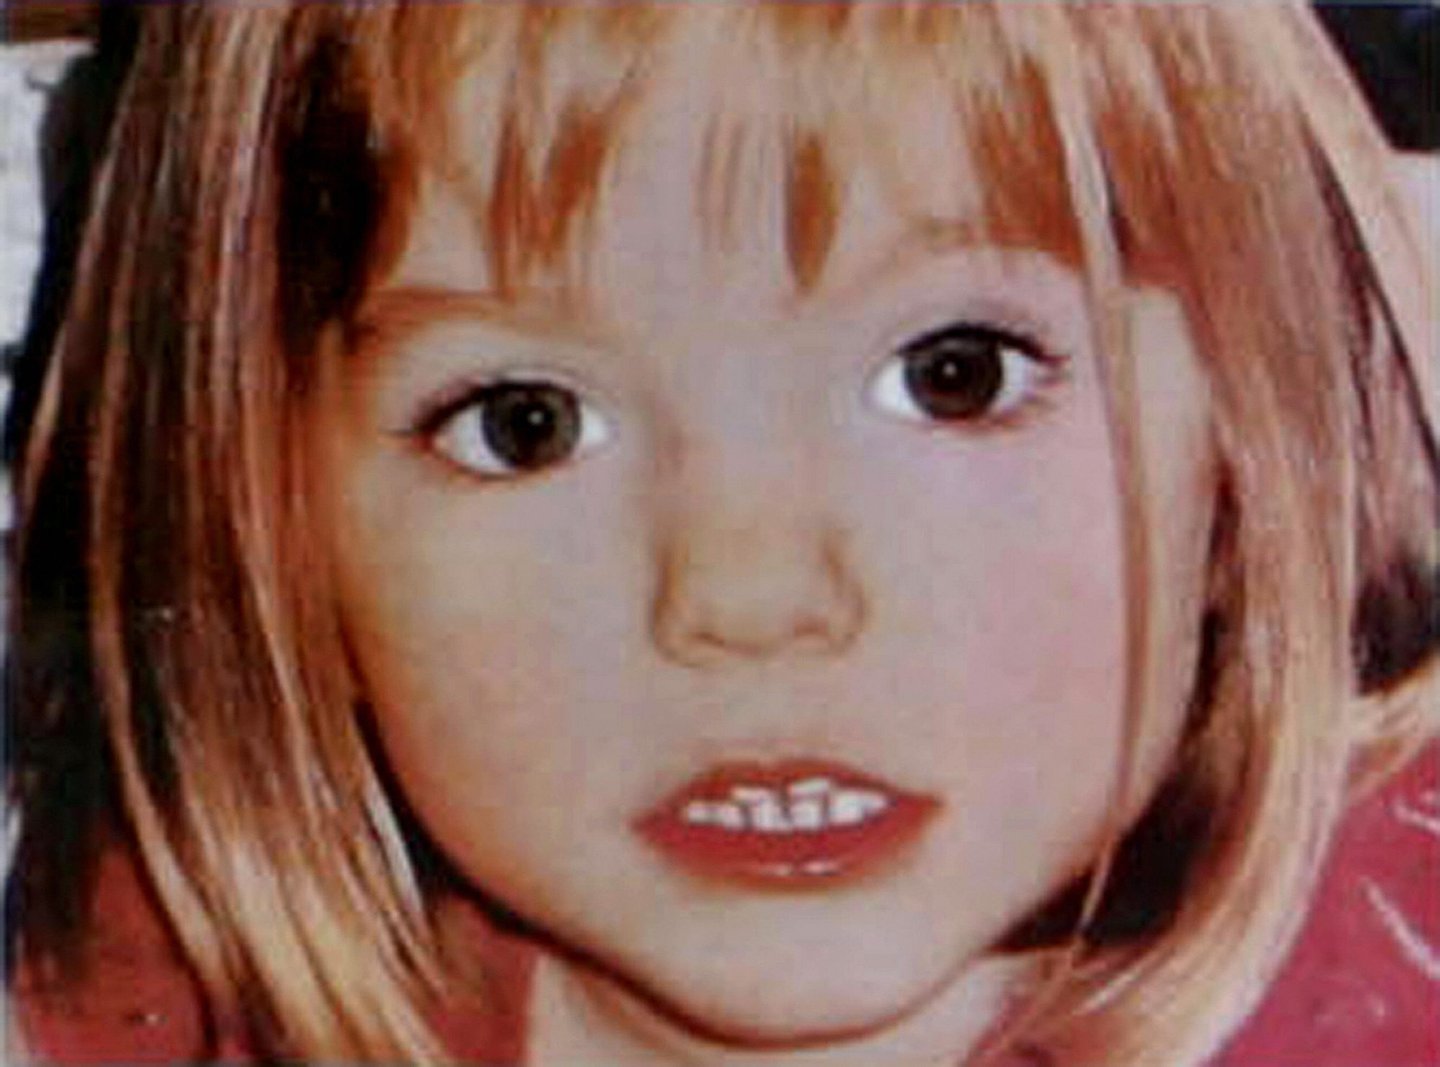 Lagos, PORTUGAL: A poster displaying the front page of the British newspaper The Sun shows 05 May 2007 a picture of three-year old British girl Madelaine McCann who went missing at the Ocean club apartment hotel in Praia de Luz , in Lagos. A team of three British police detectives arrived in Portugal today to help track down a suspected kidnapper believed to have abducted a British toddler. AFP PHOTO/- NO SALES (Photo credit should read -/AFP/Getty Images)